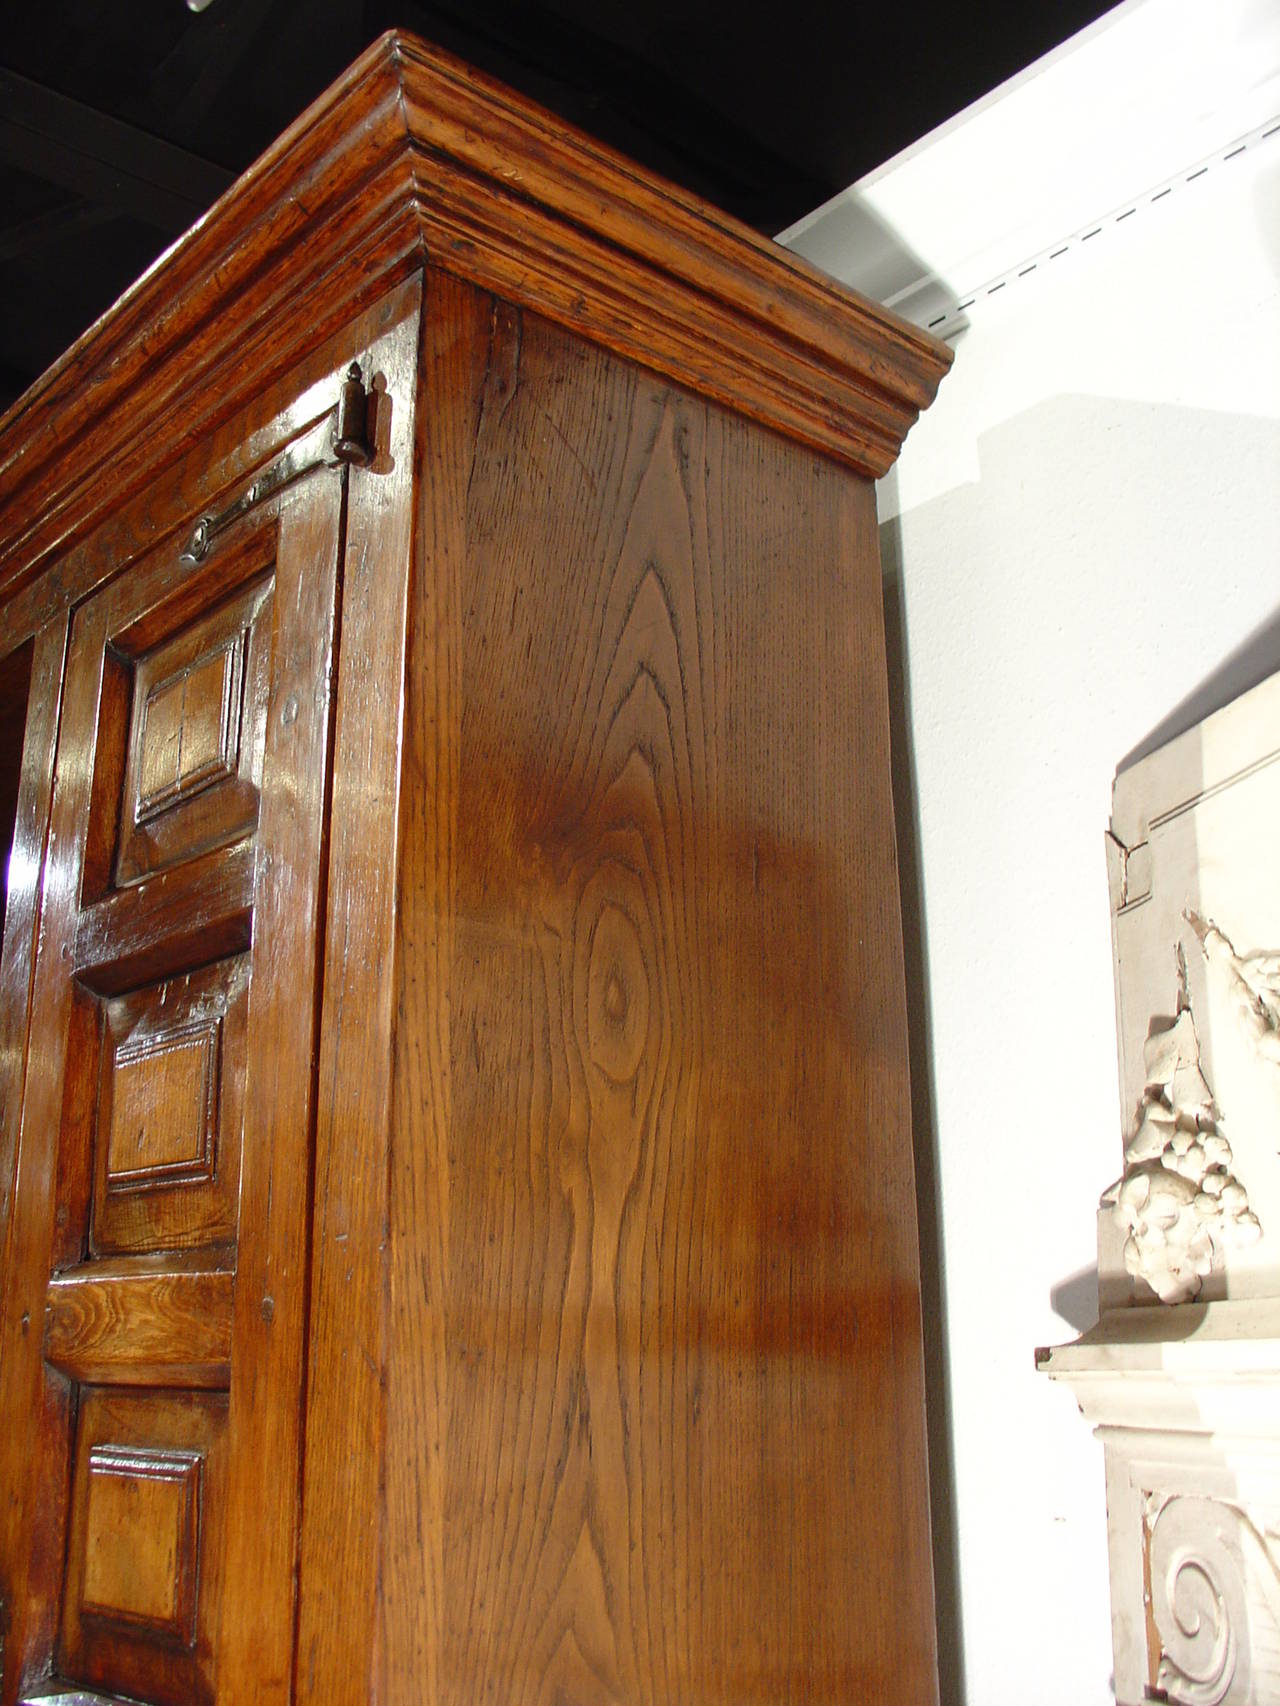 Carved Large Oak Bookcase with Iron Hardware from Spain, Early 1900s